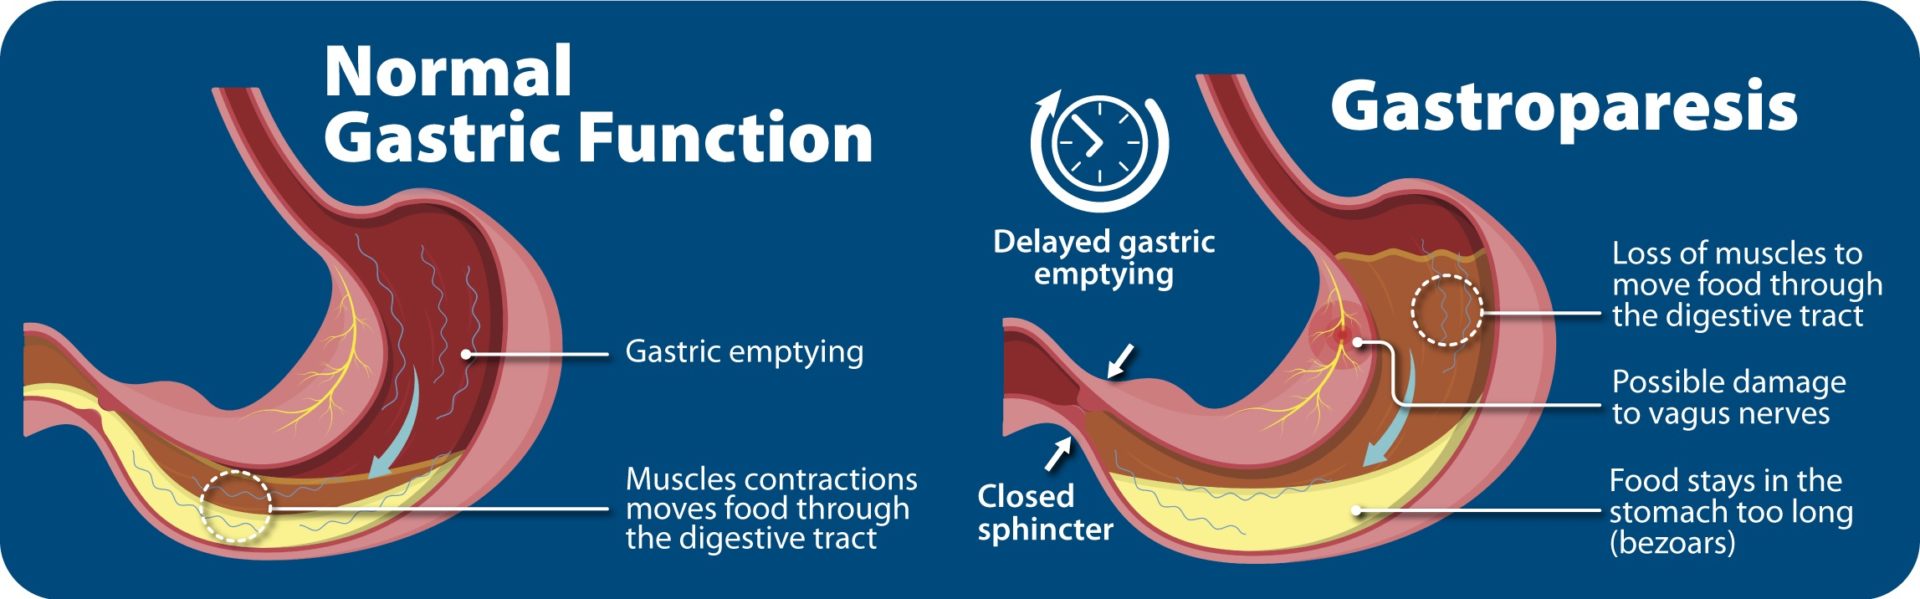 gastroparesis-impact-on-digestion-diagram